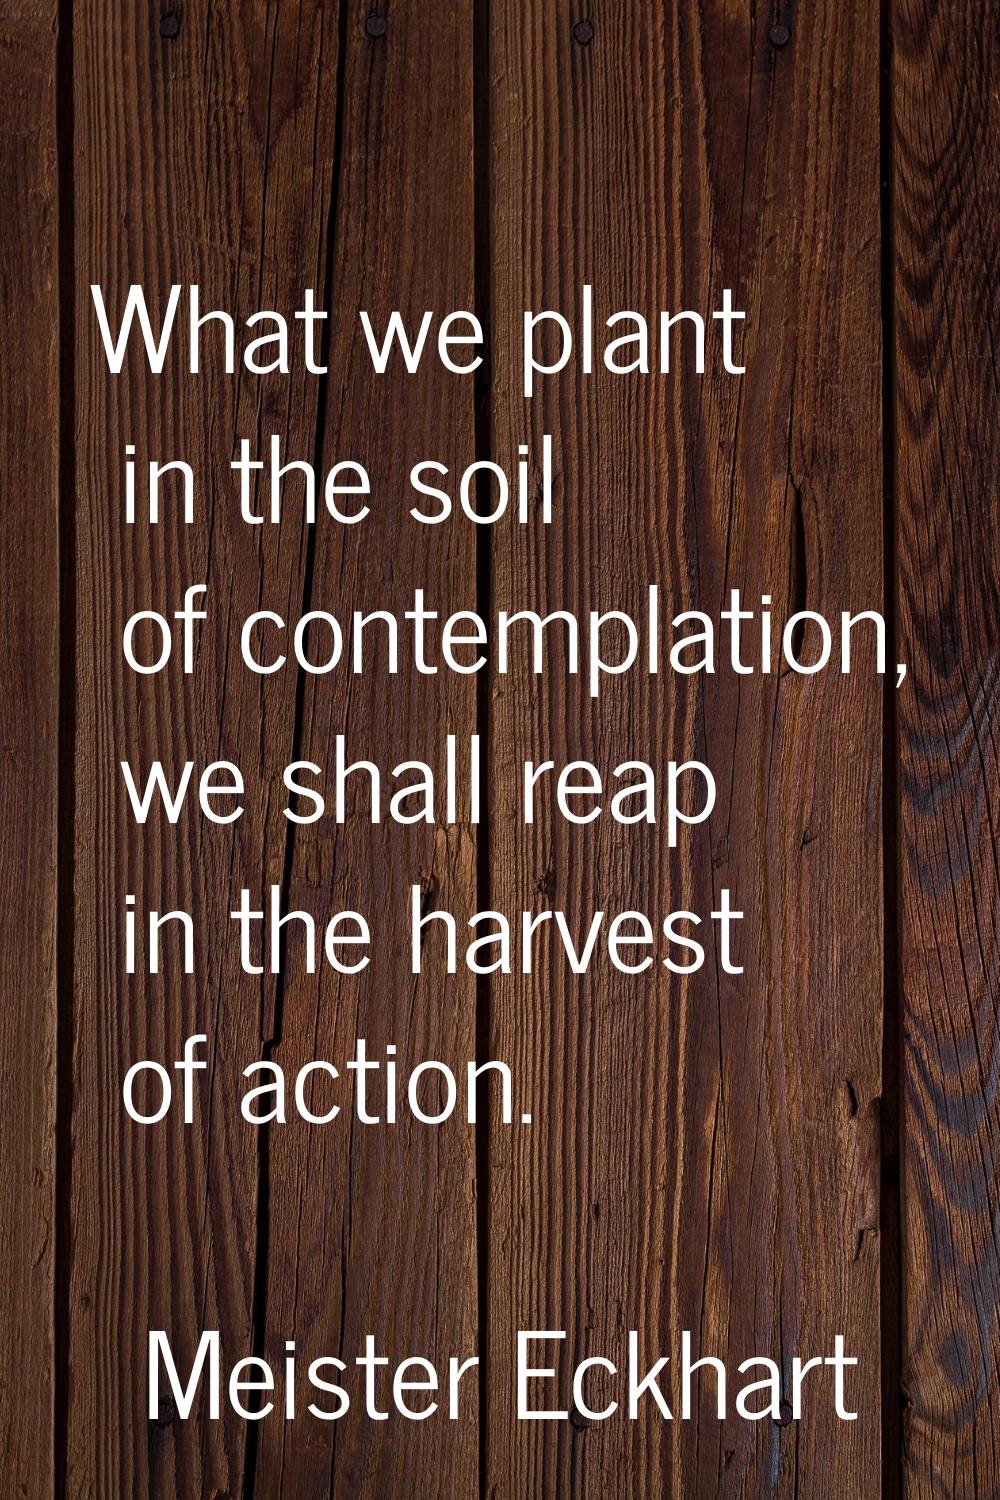 What we plant in the soil of contemplation, we shall reap in the harvest of action.